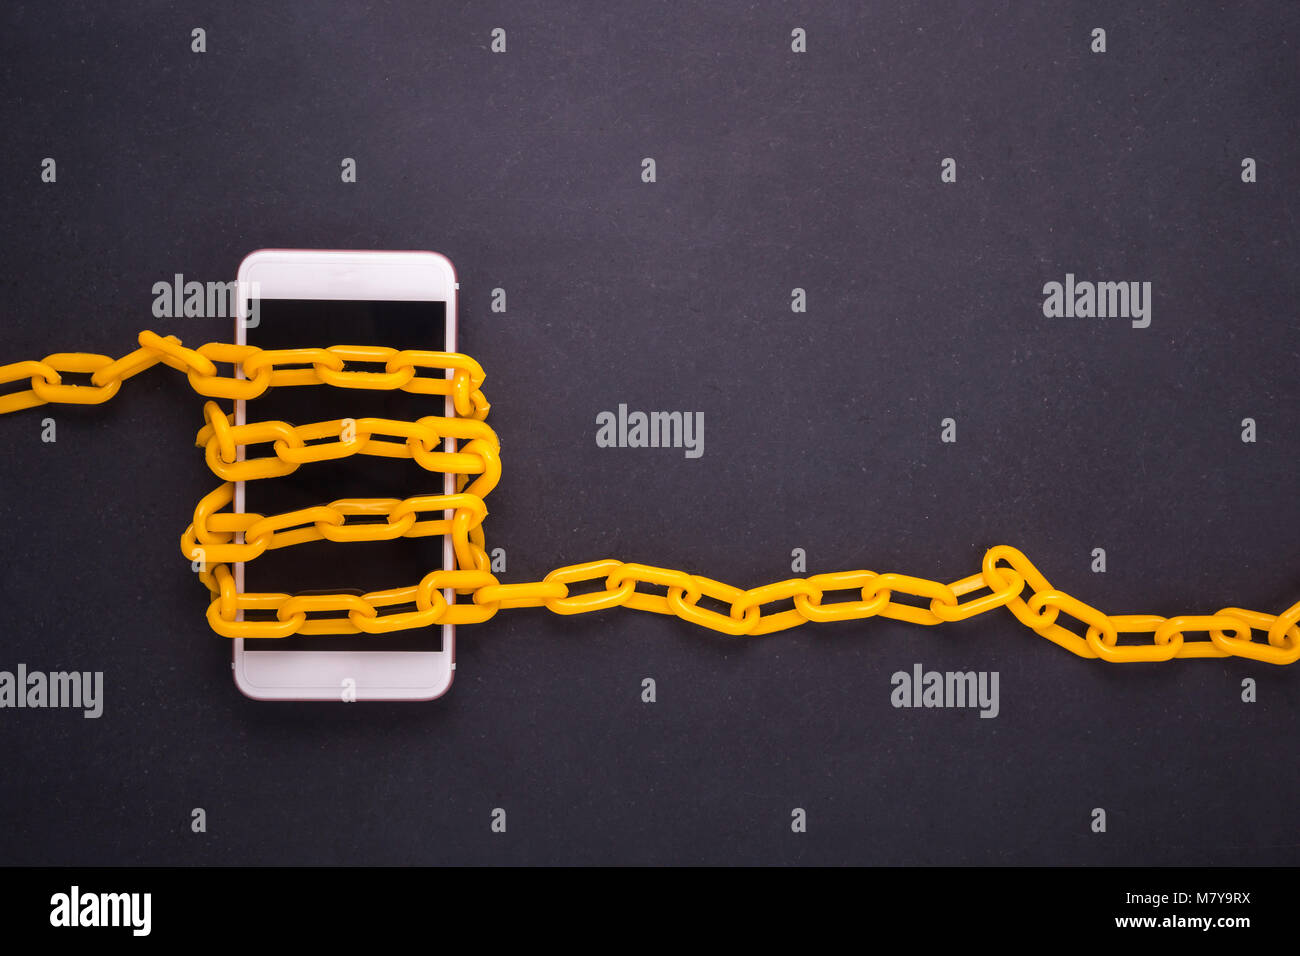 Yellow chain locked around the smartphone on black stone board. Stop, control or avoid using smartphone concept. Top view Stock Photo